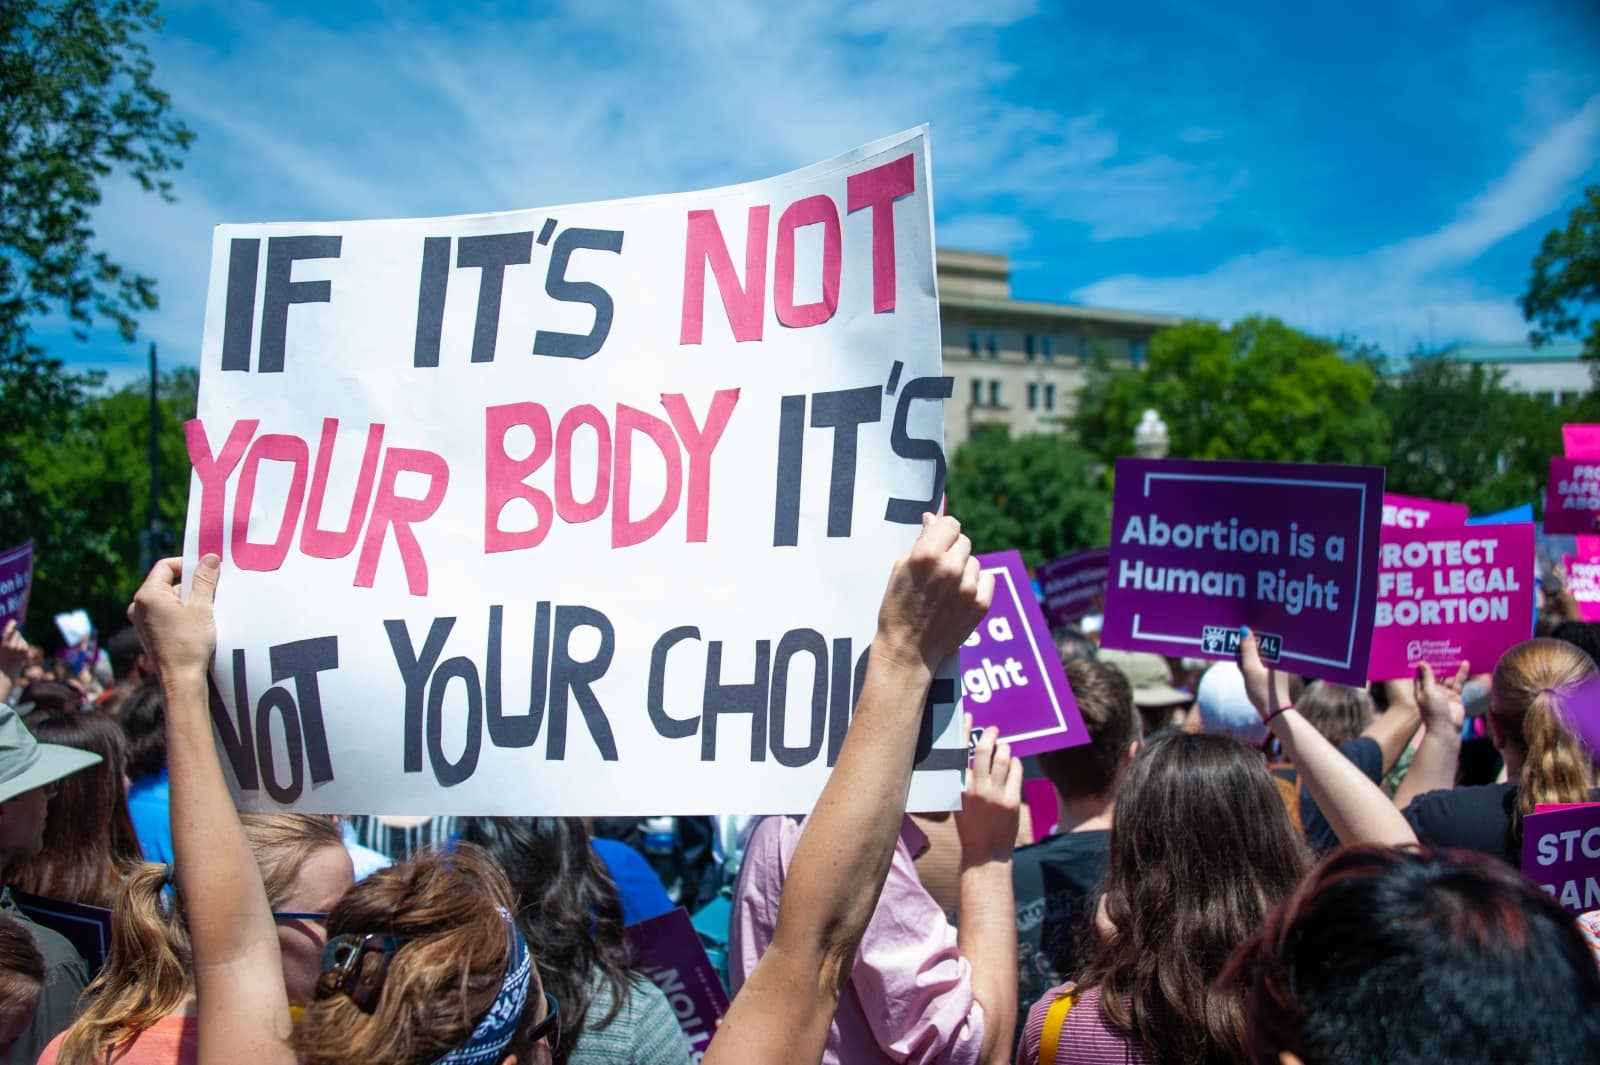 Image Credit: Shutterstock / Rena Schild <p><span>From abortion rights to gender-affirming surgeries, the fight for control over one’s body is fierce. Feminists and transgender activists share common ground, but the devil’s in the details.</span></p>